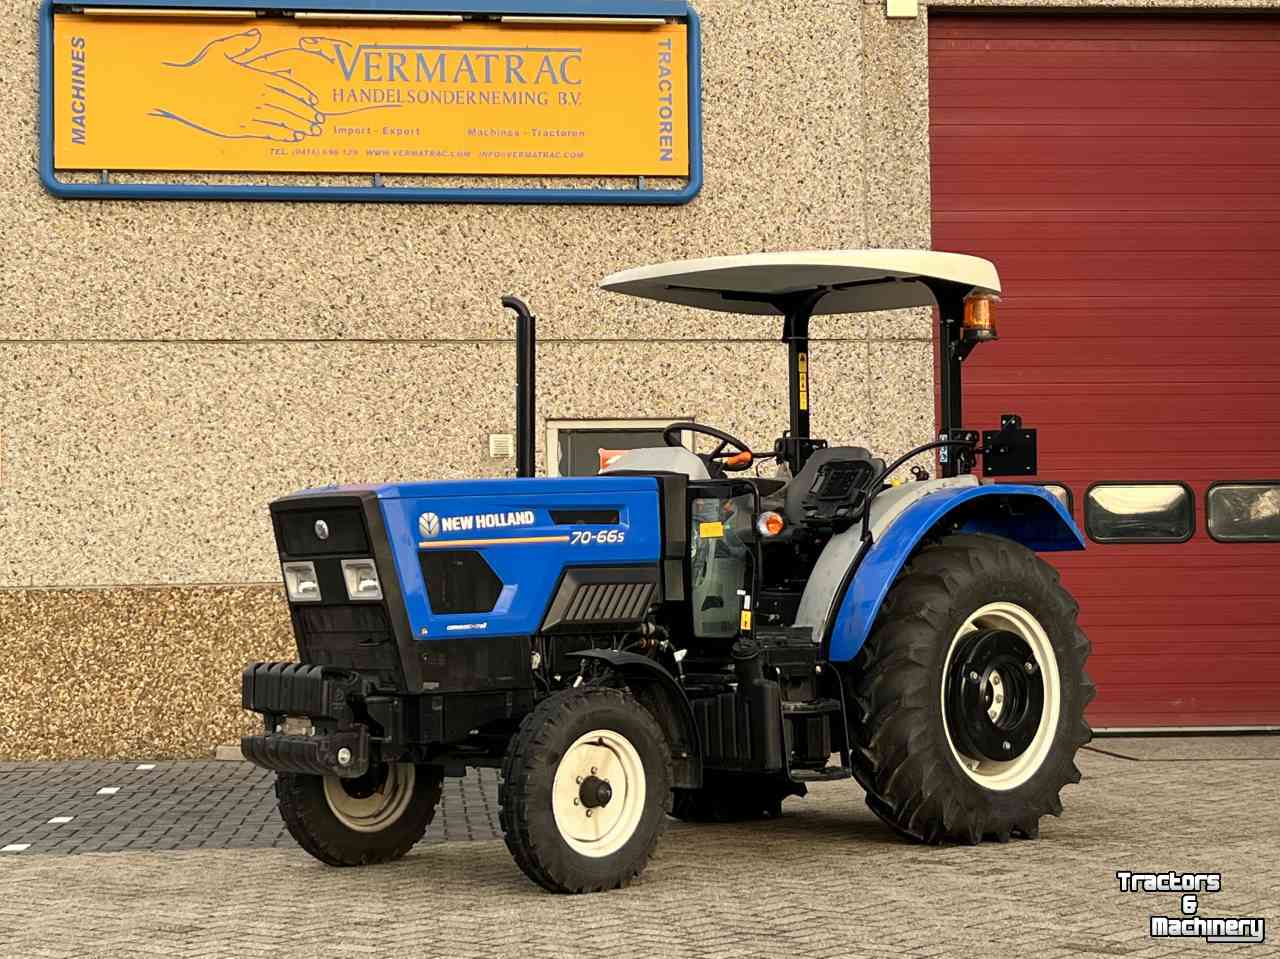 Tracteurs New Holland 70-66S 2WD  8x2 35km Only Export 8035-25 Engine